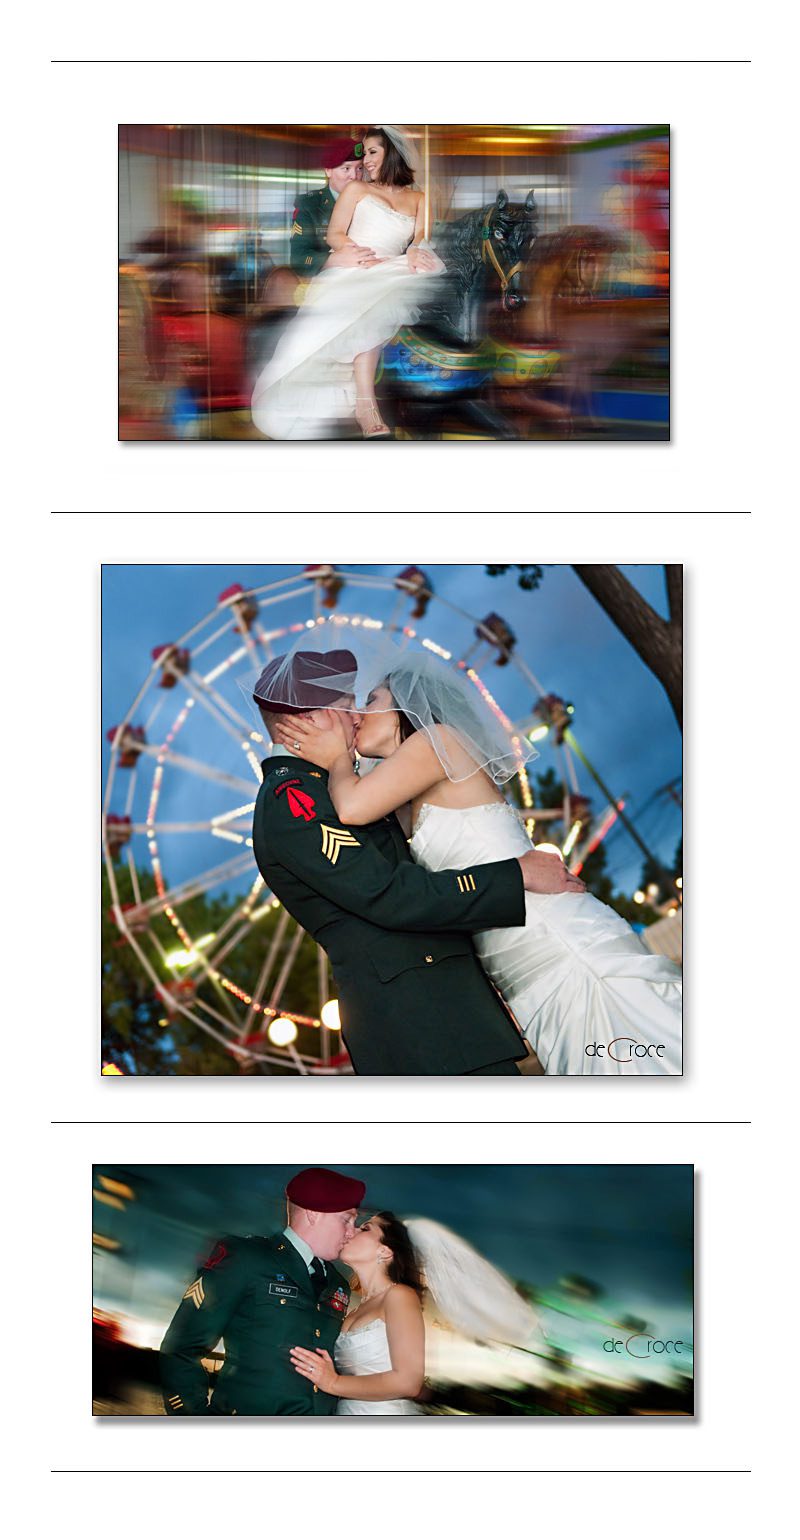 Bride and Groom at Lakeside Amusement Park In Denver, Co.